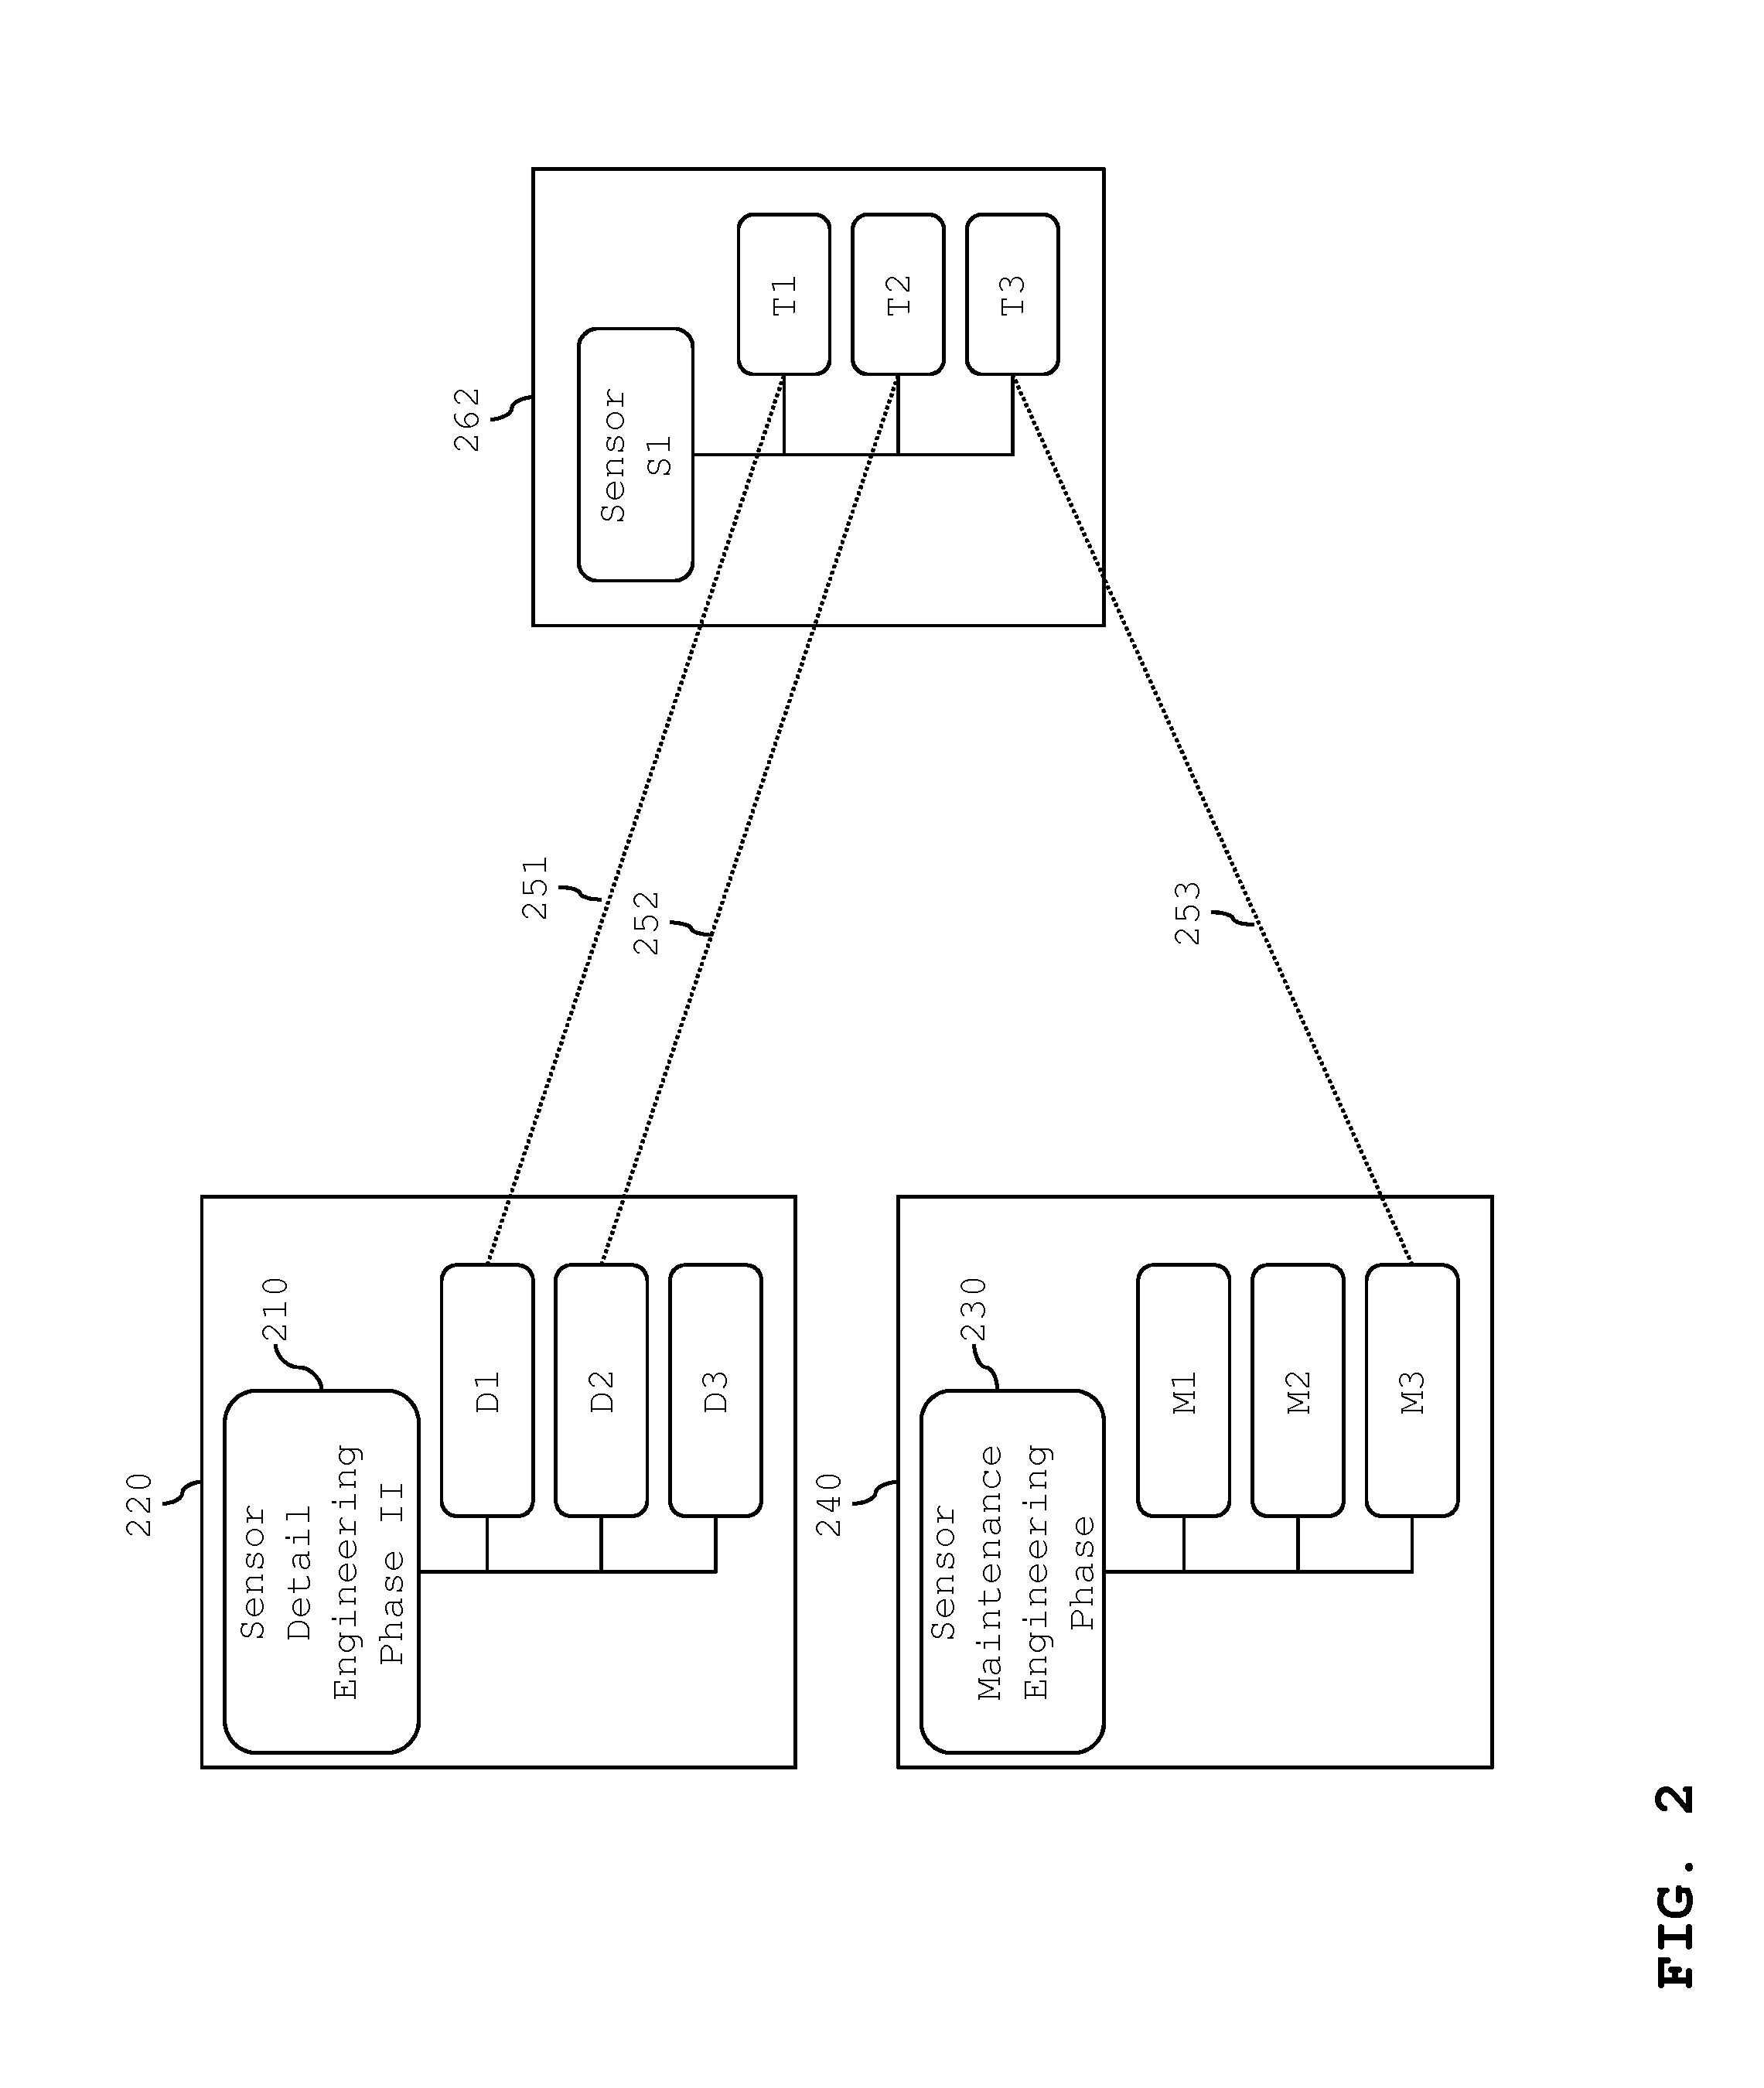 Method and system to support technical tasks in distributed control systems